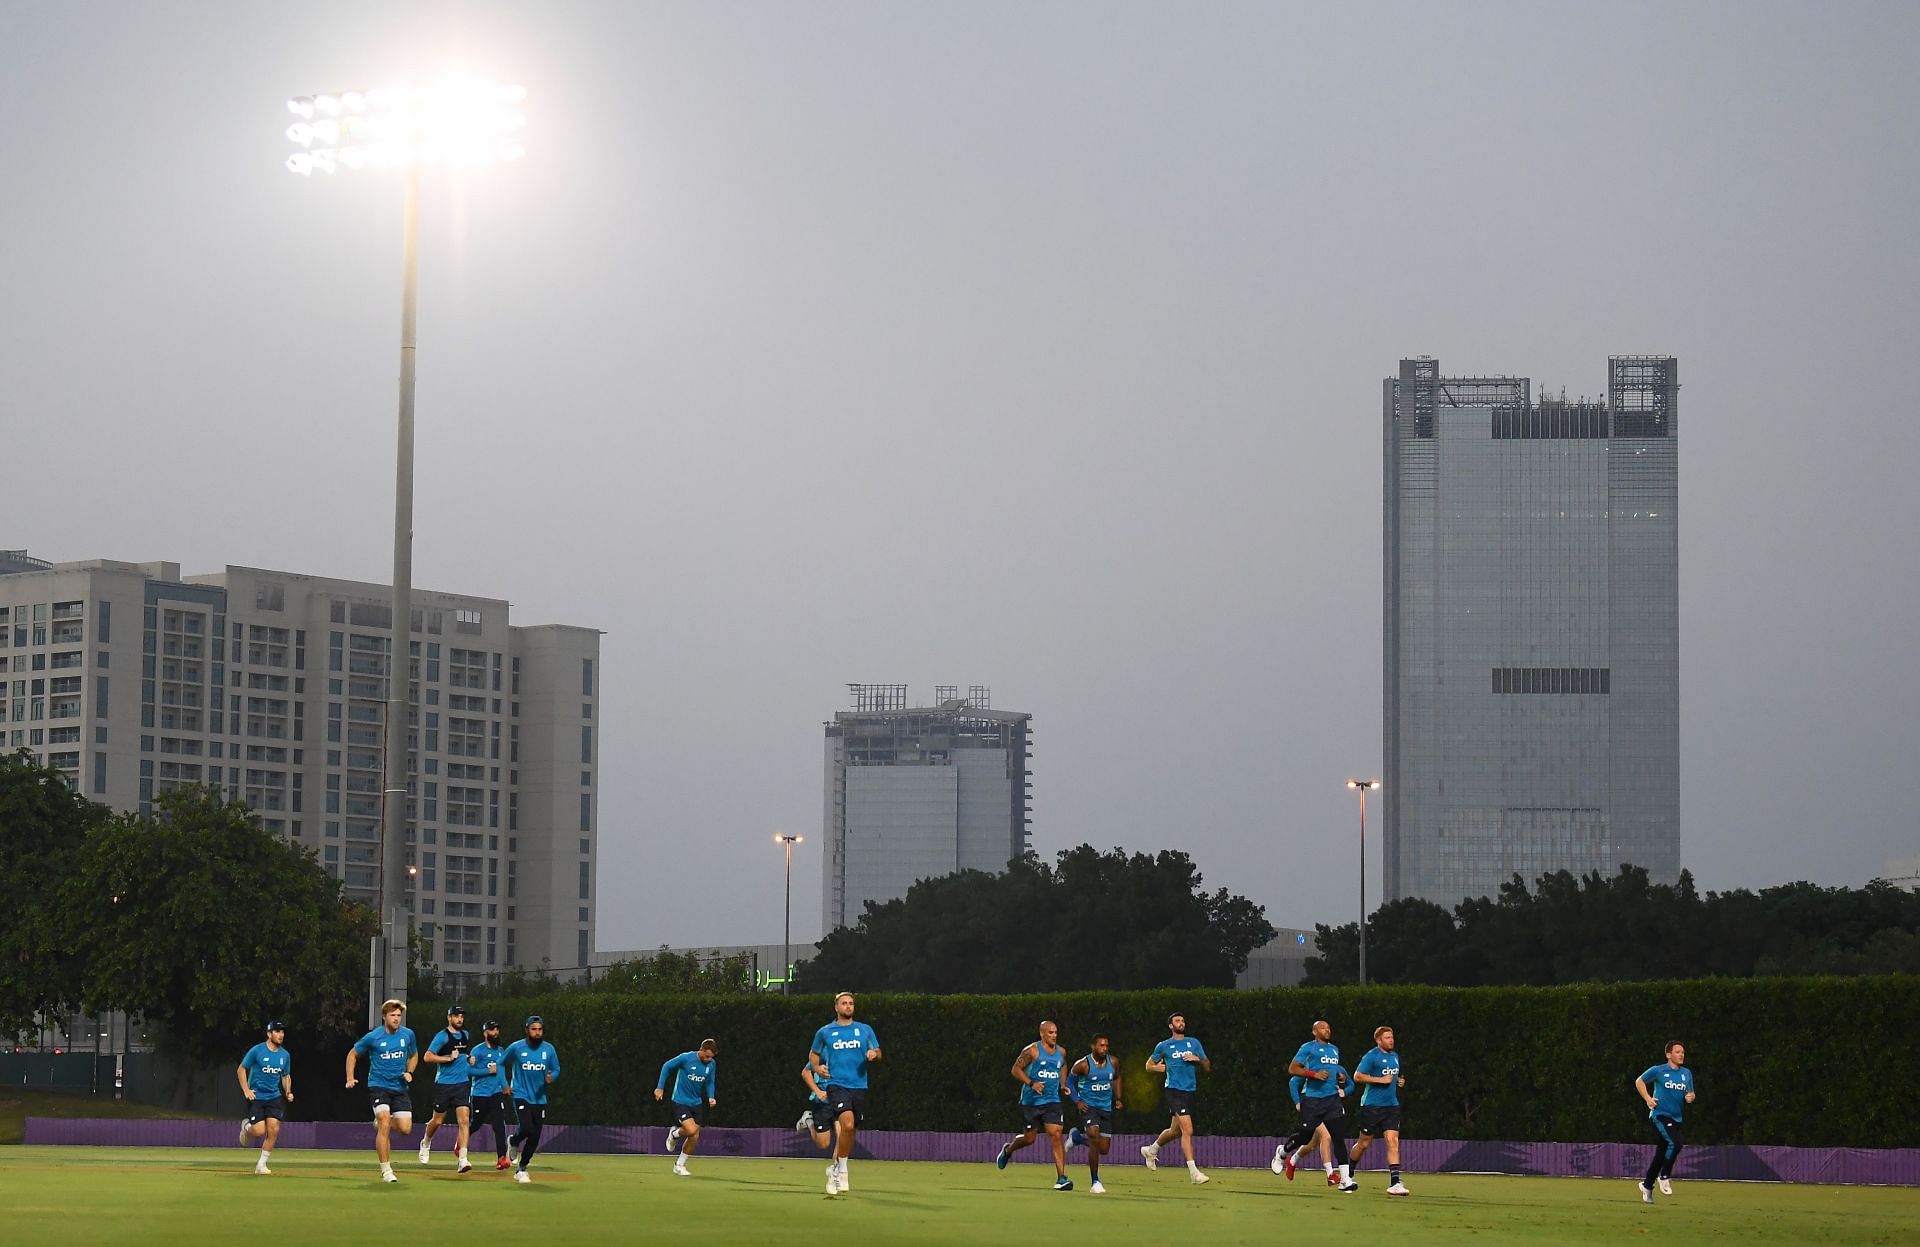 The ICC Academy in Dubai will host this clash between United Arab Emirates and Oman